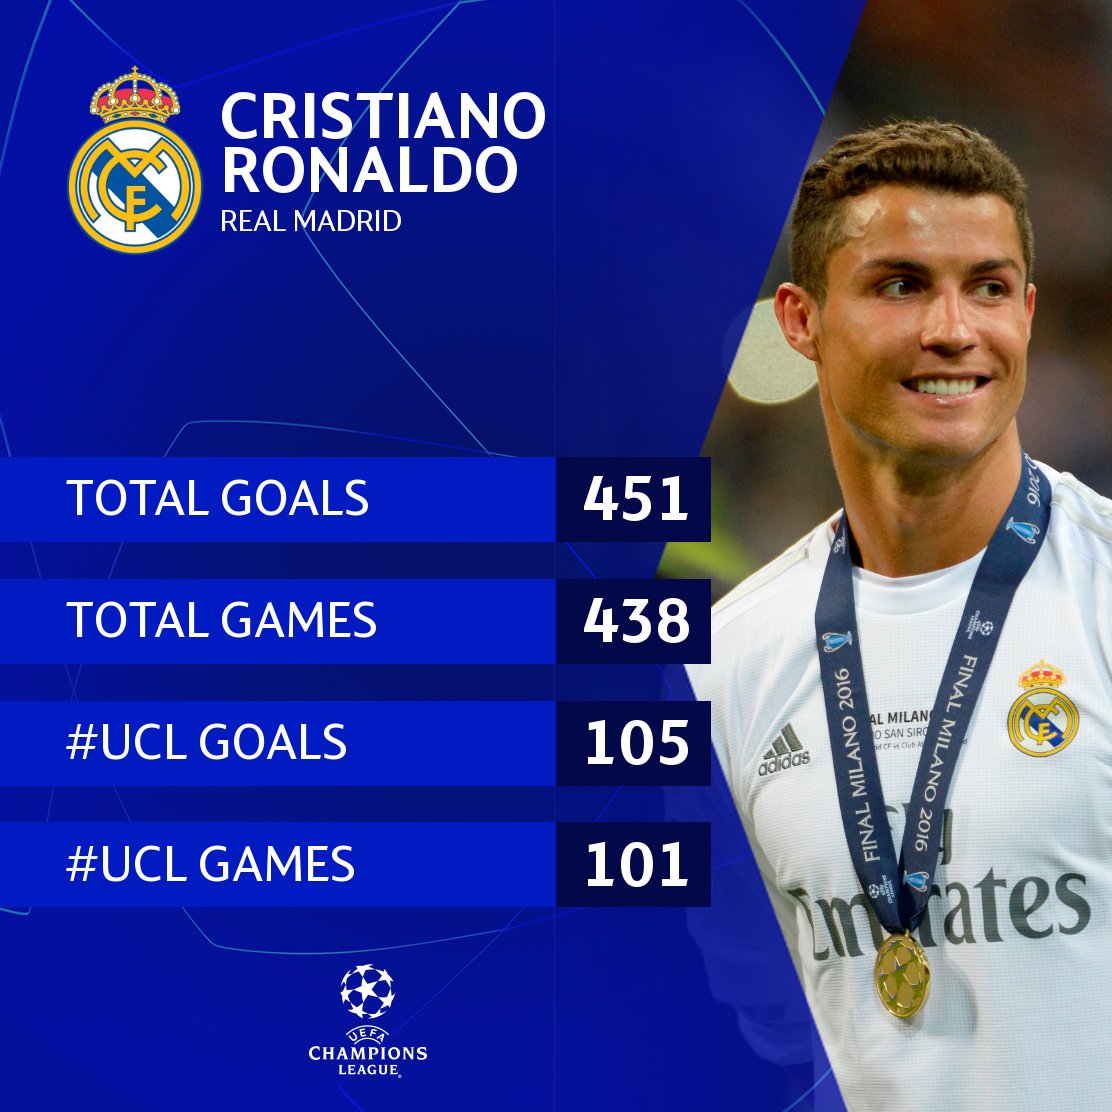 UEFA Champions League on Twitter: "ℹ️ Cristiano Ronaldo's record at Real  Madrid = ______ #UCL https://t.co/dmqhInpxm3" / Twitter